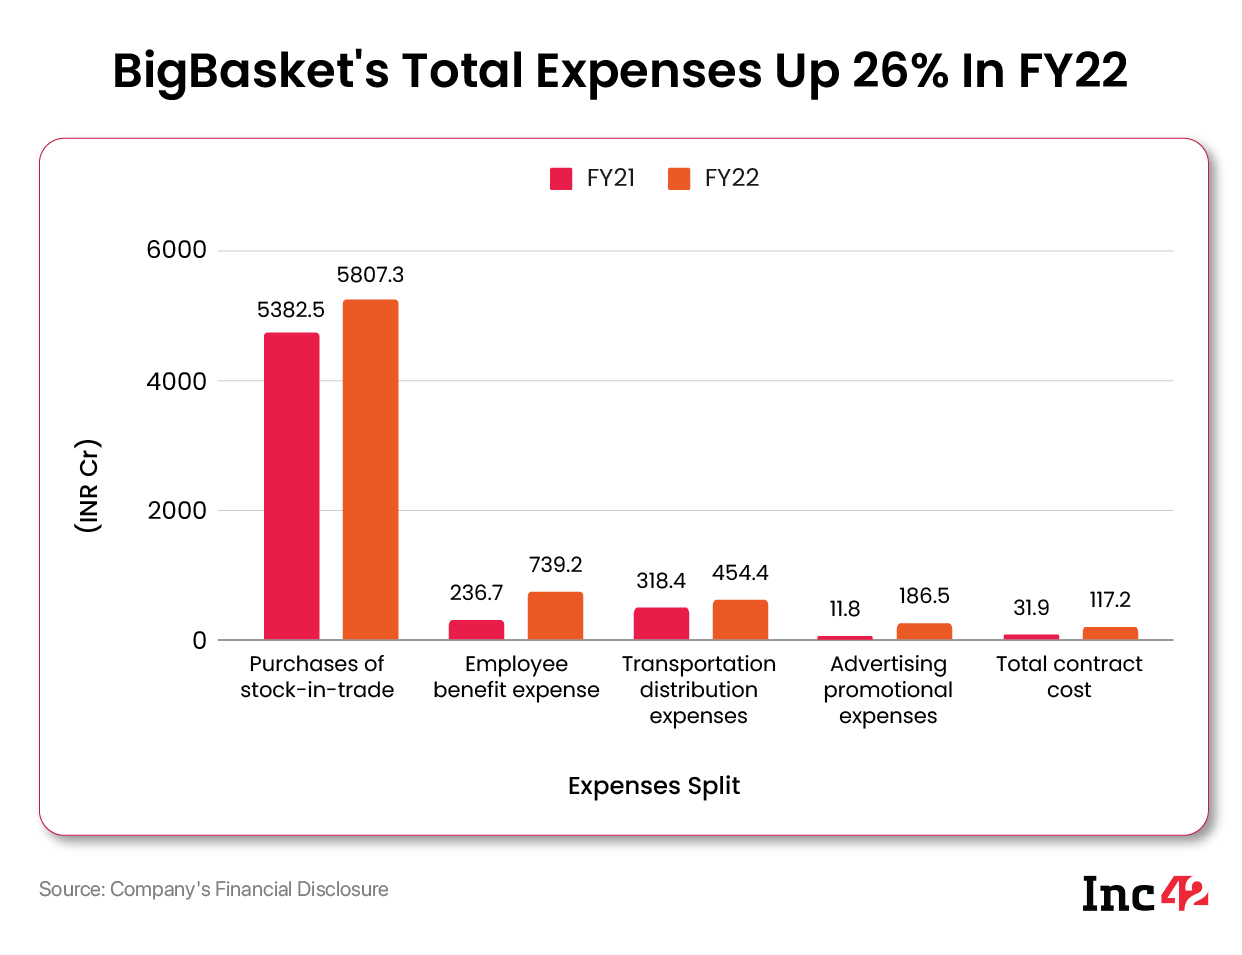 BigBasket’s Loss Widens 4X To INR 812.7 Cr In FY22; Expenses Up 26%